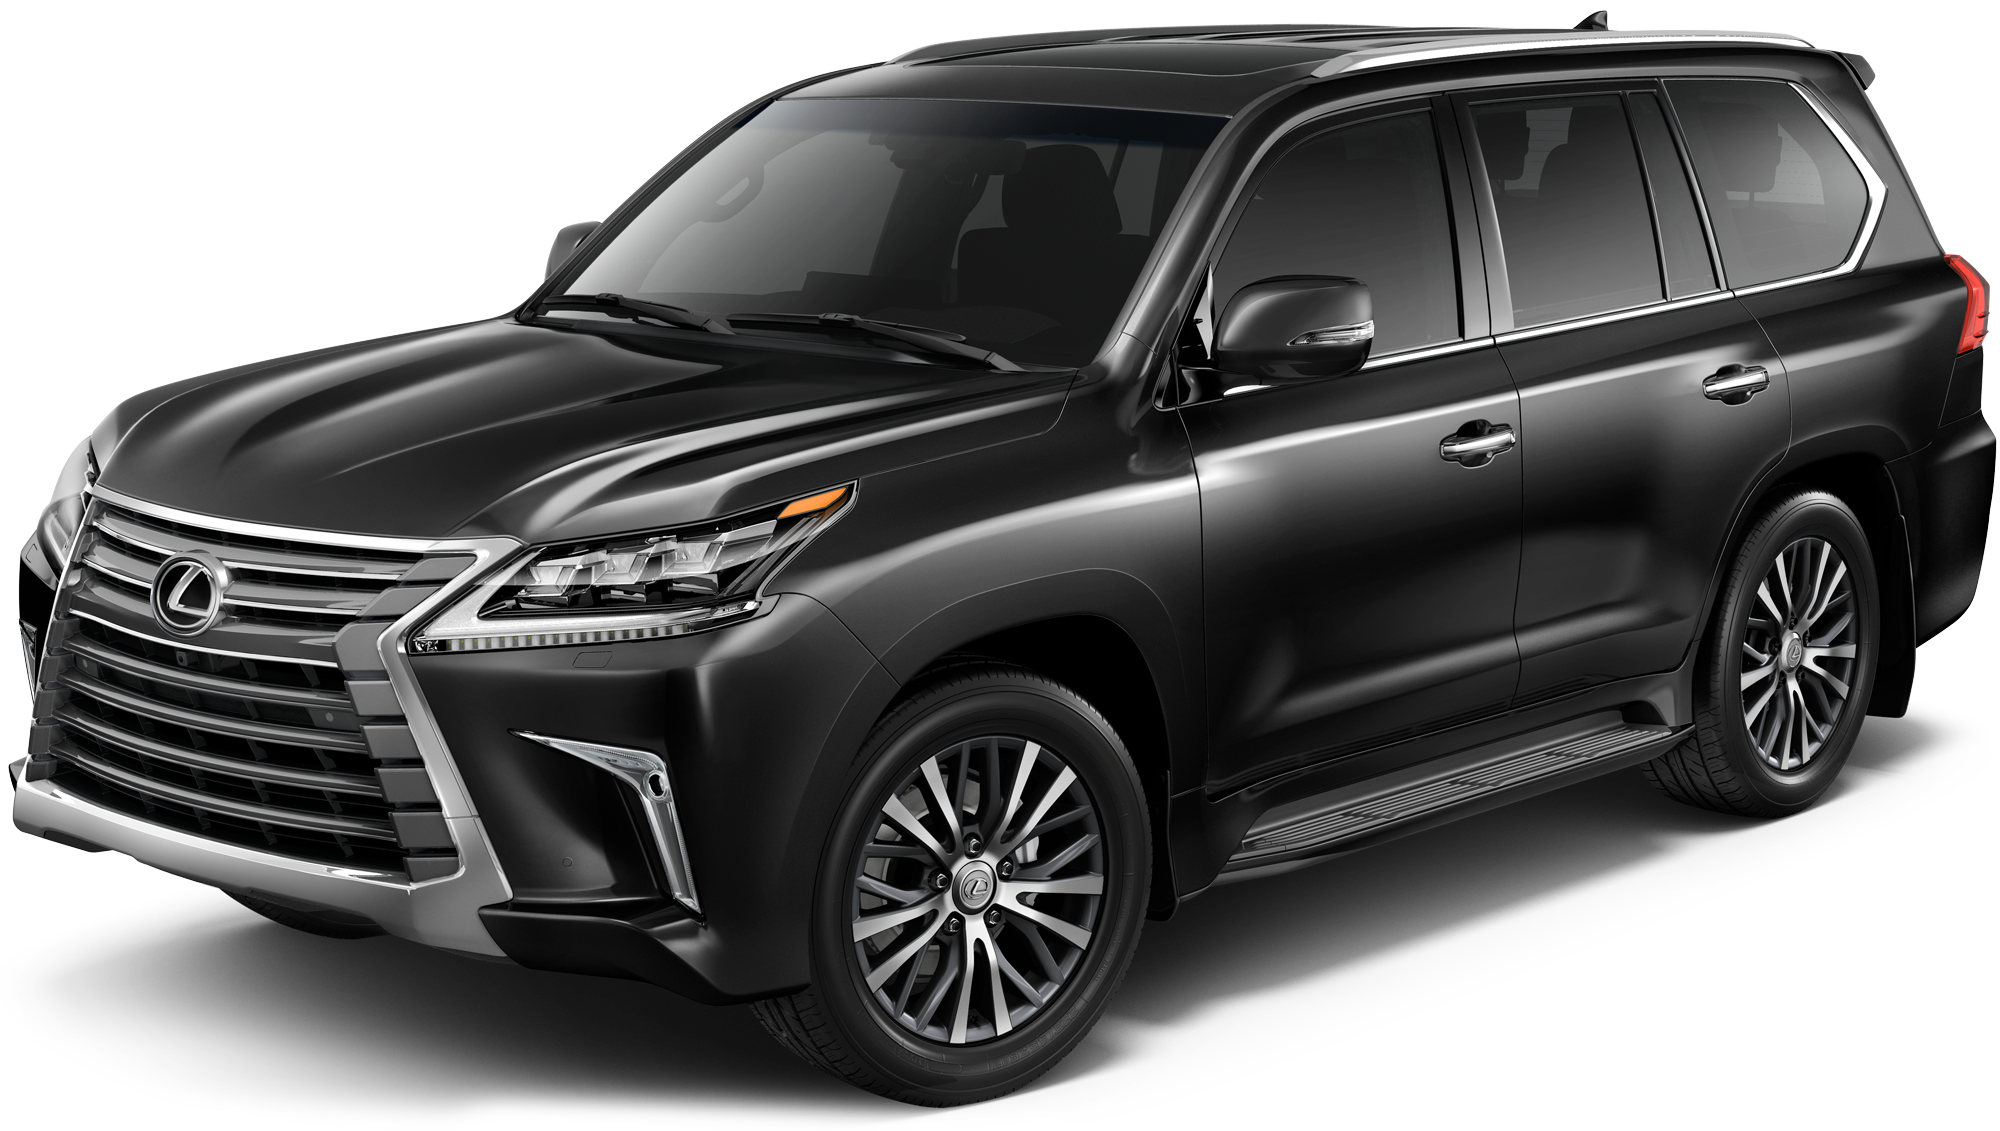 2019 Lexus LX 570 Incentives, Specials & Offers in Riverside CA